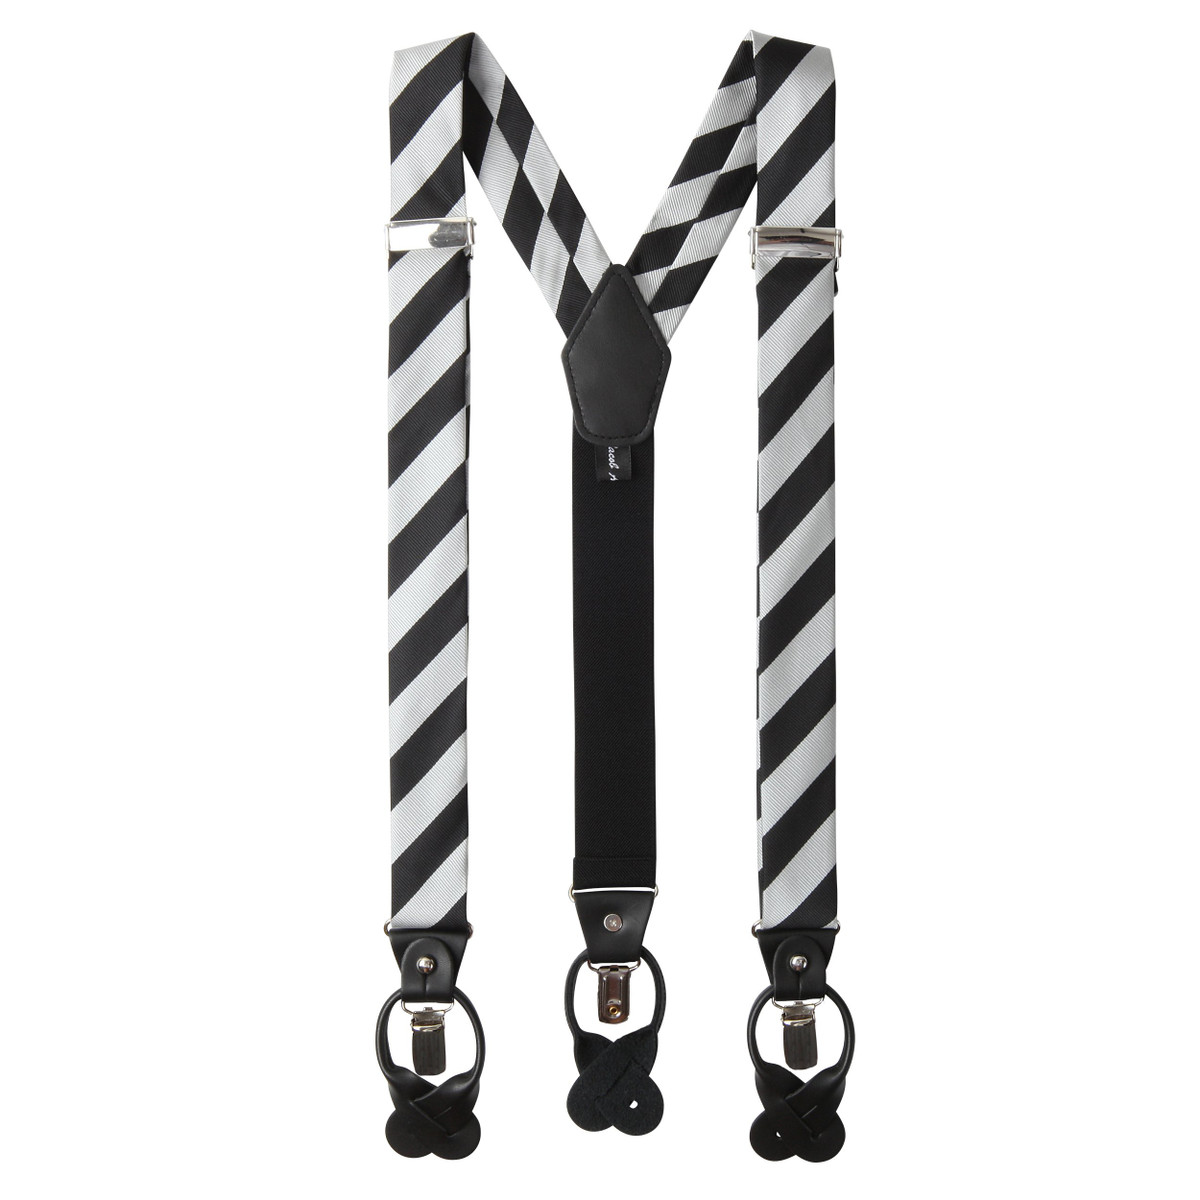 Men's College Stripe Y-Back Suspenders Braces Convertible Leather Ends and Clips - Silver Black